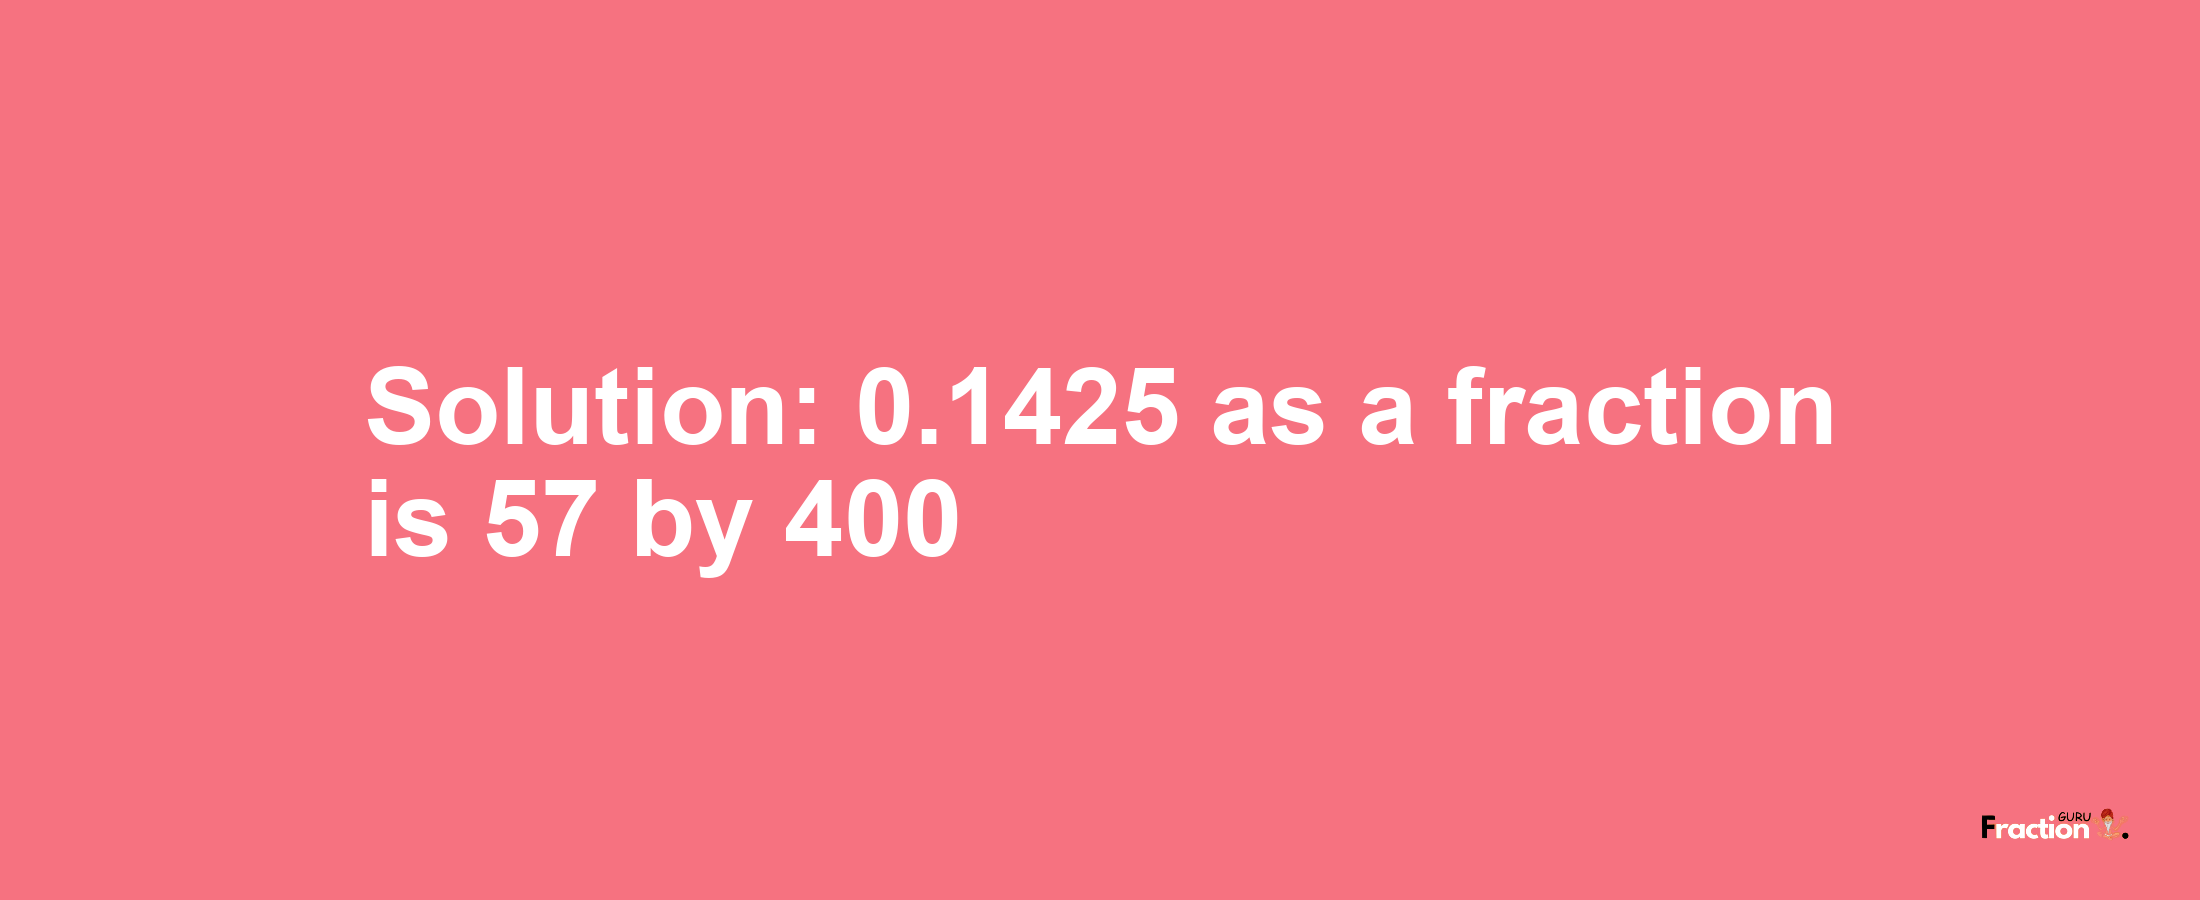 Solution:0.1425 as a fraction is 57/400